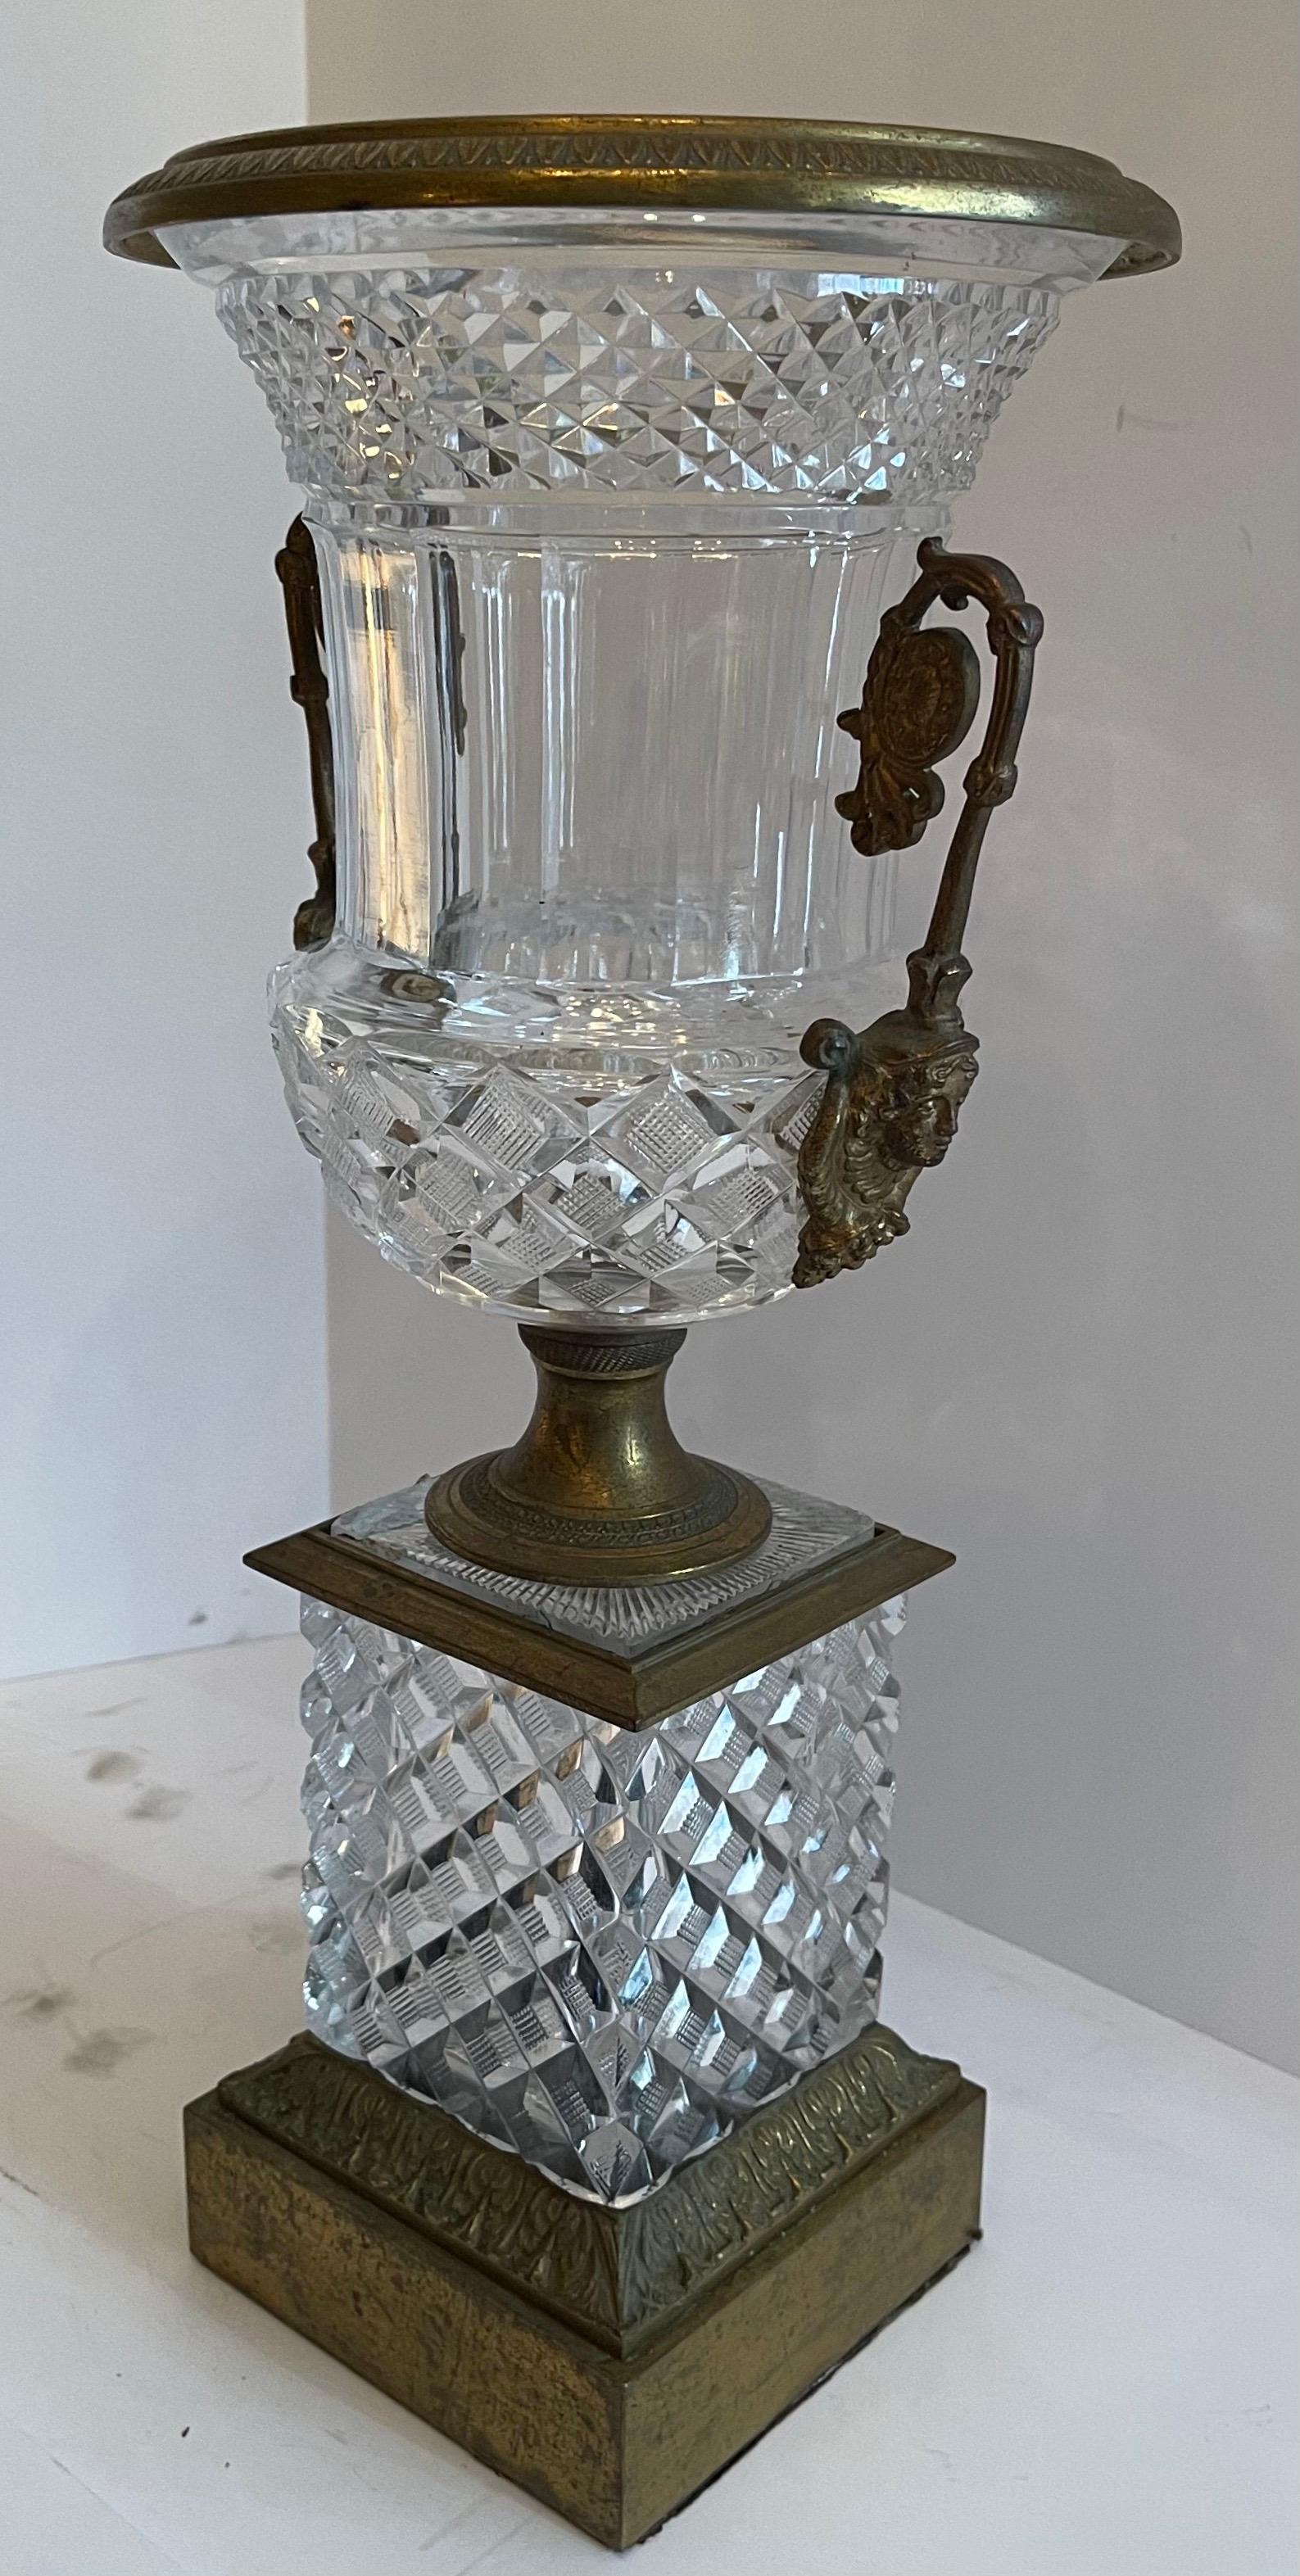 A wonderful French Empire / neoclassical cut crystal and bronze ormolu mounted urn with lady figure handles centerpiece.

  